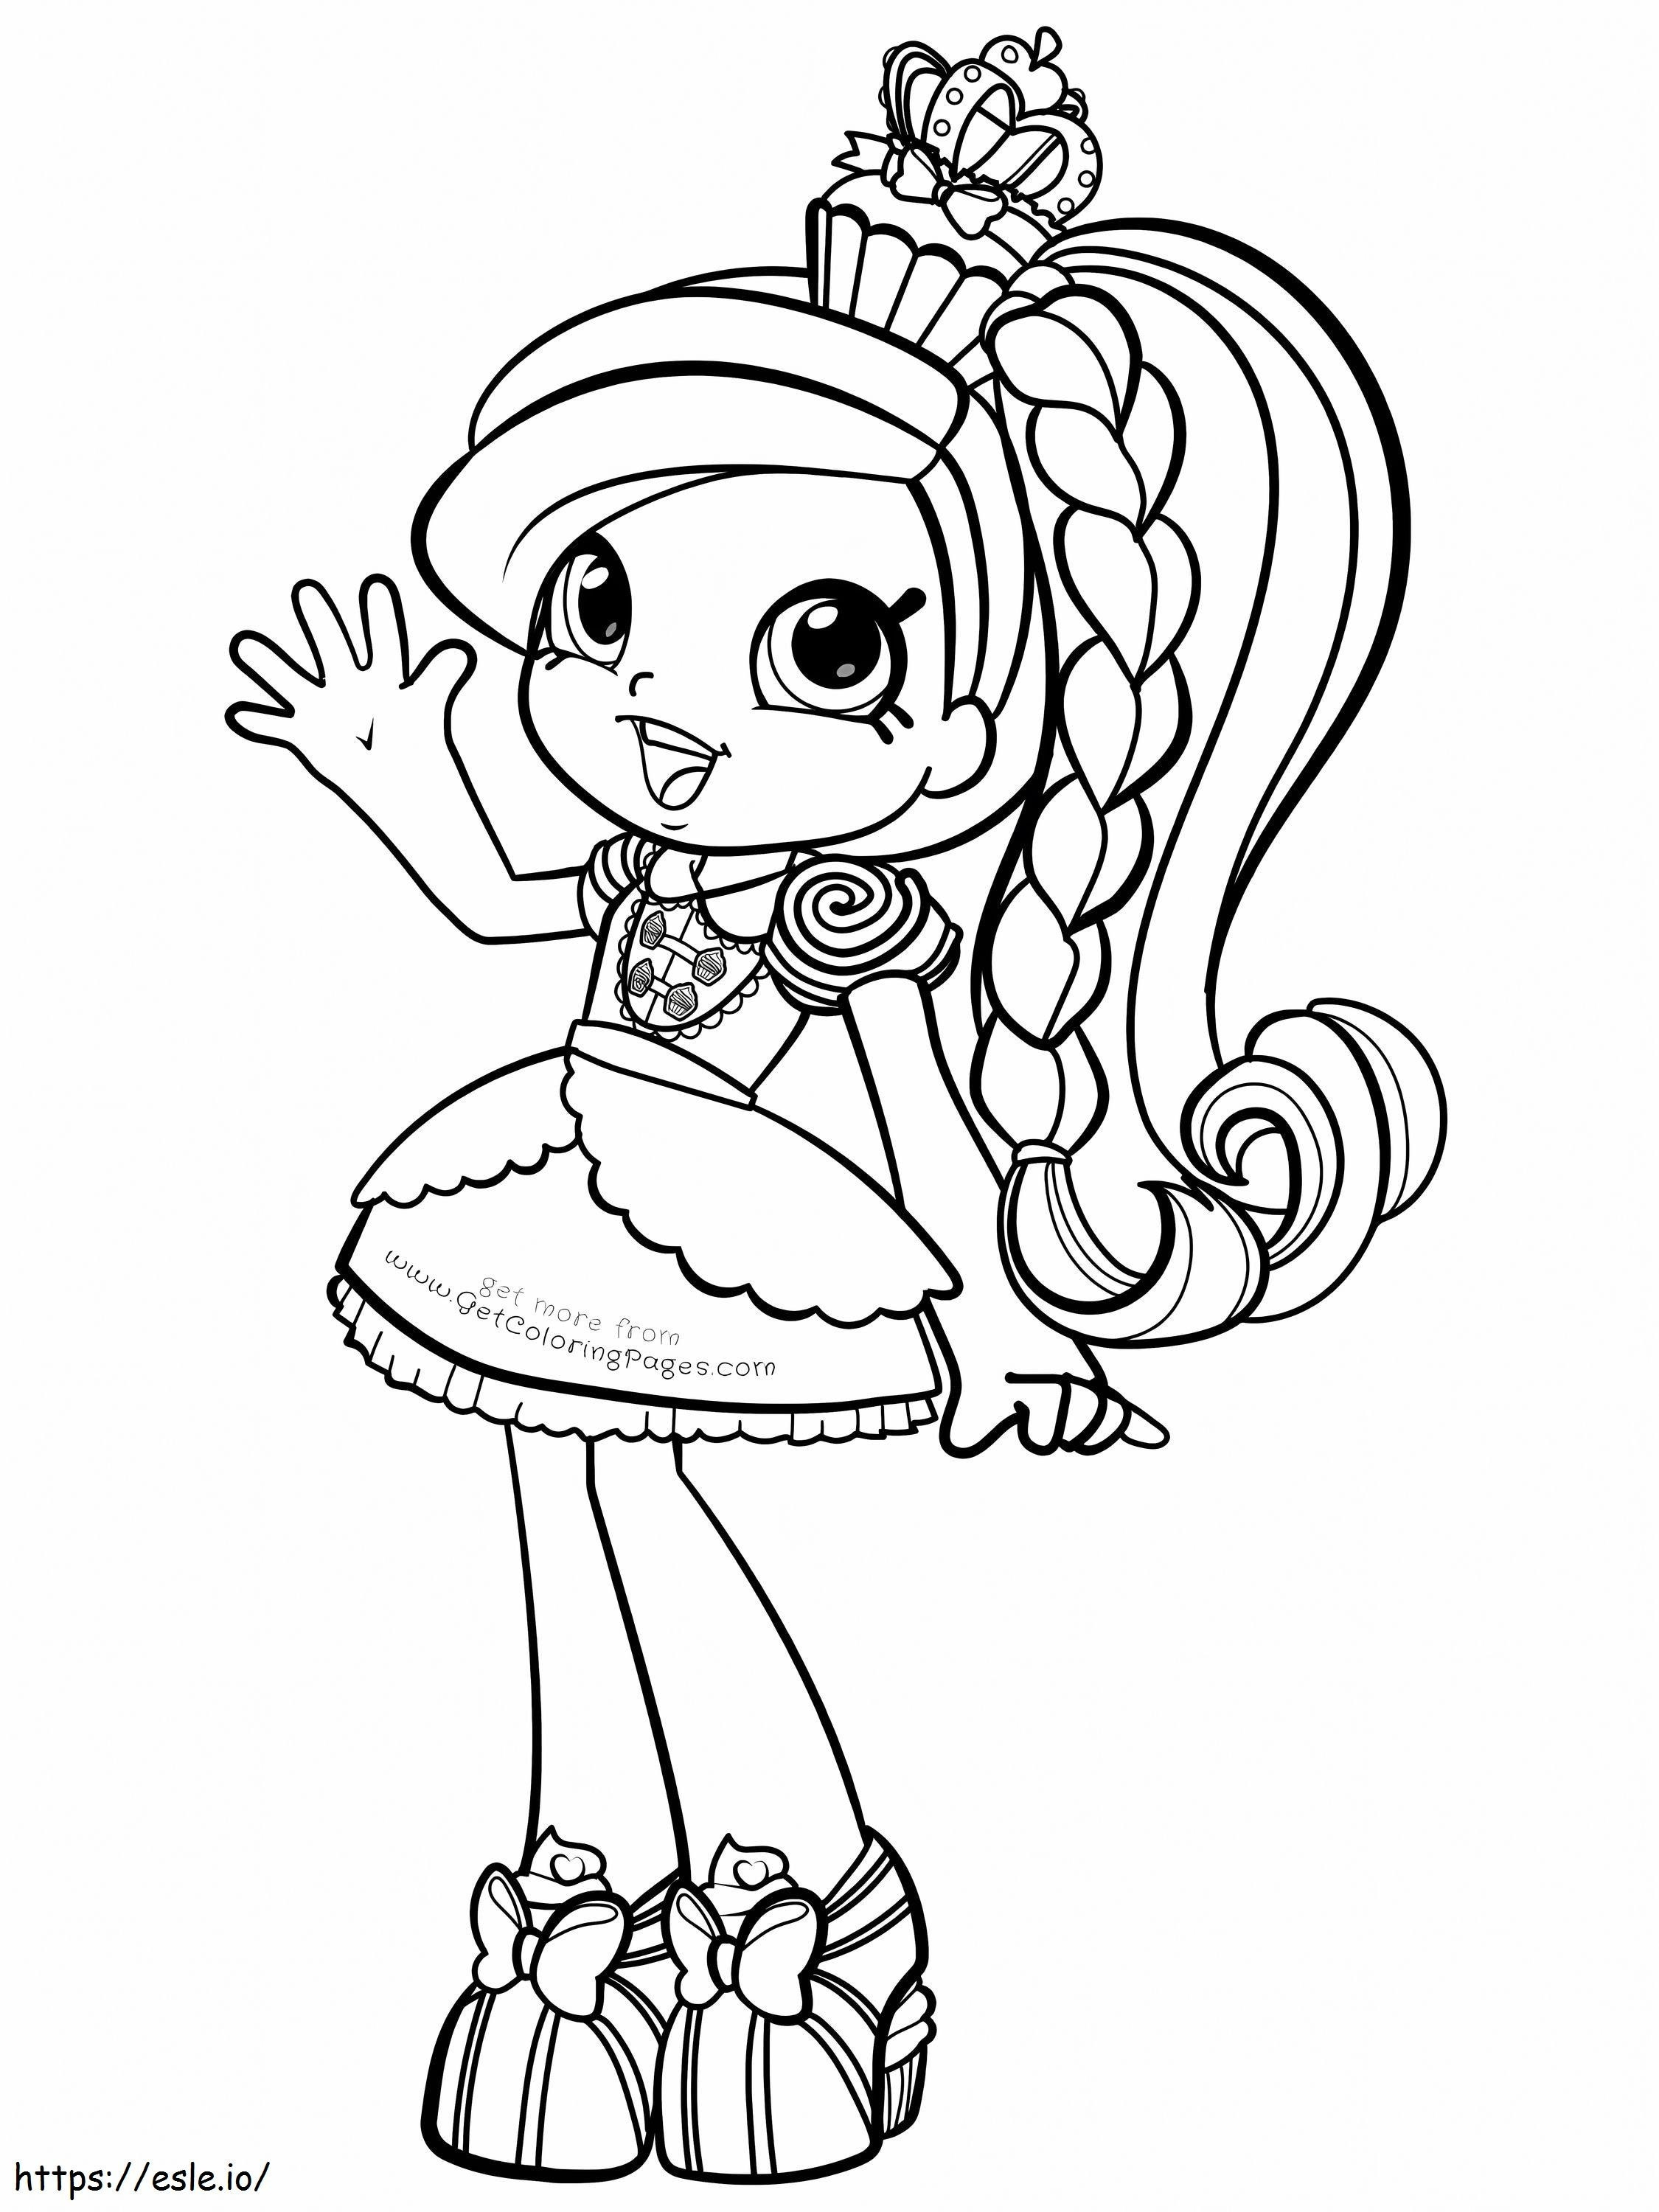 Cute Jessicake coloring page